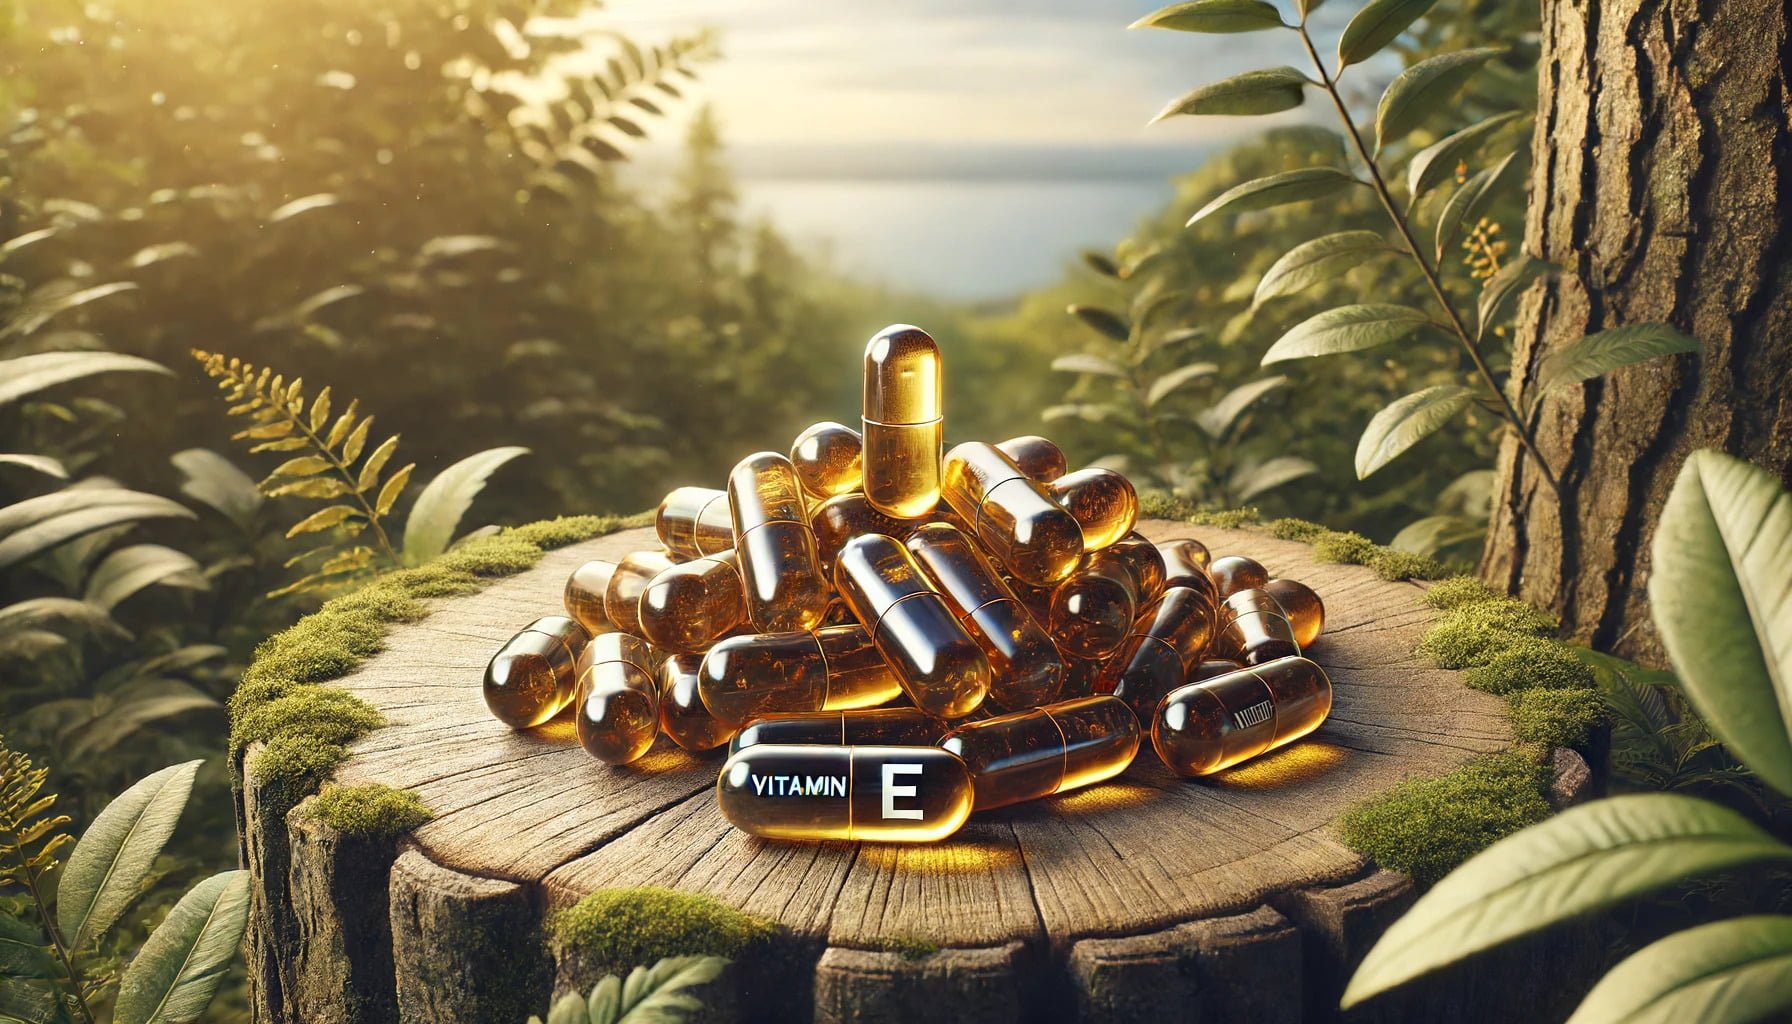 A photorealistic image of Vitamin E nootropic capsules, prominently displayed in a natural setting.